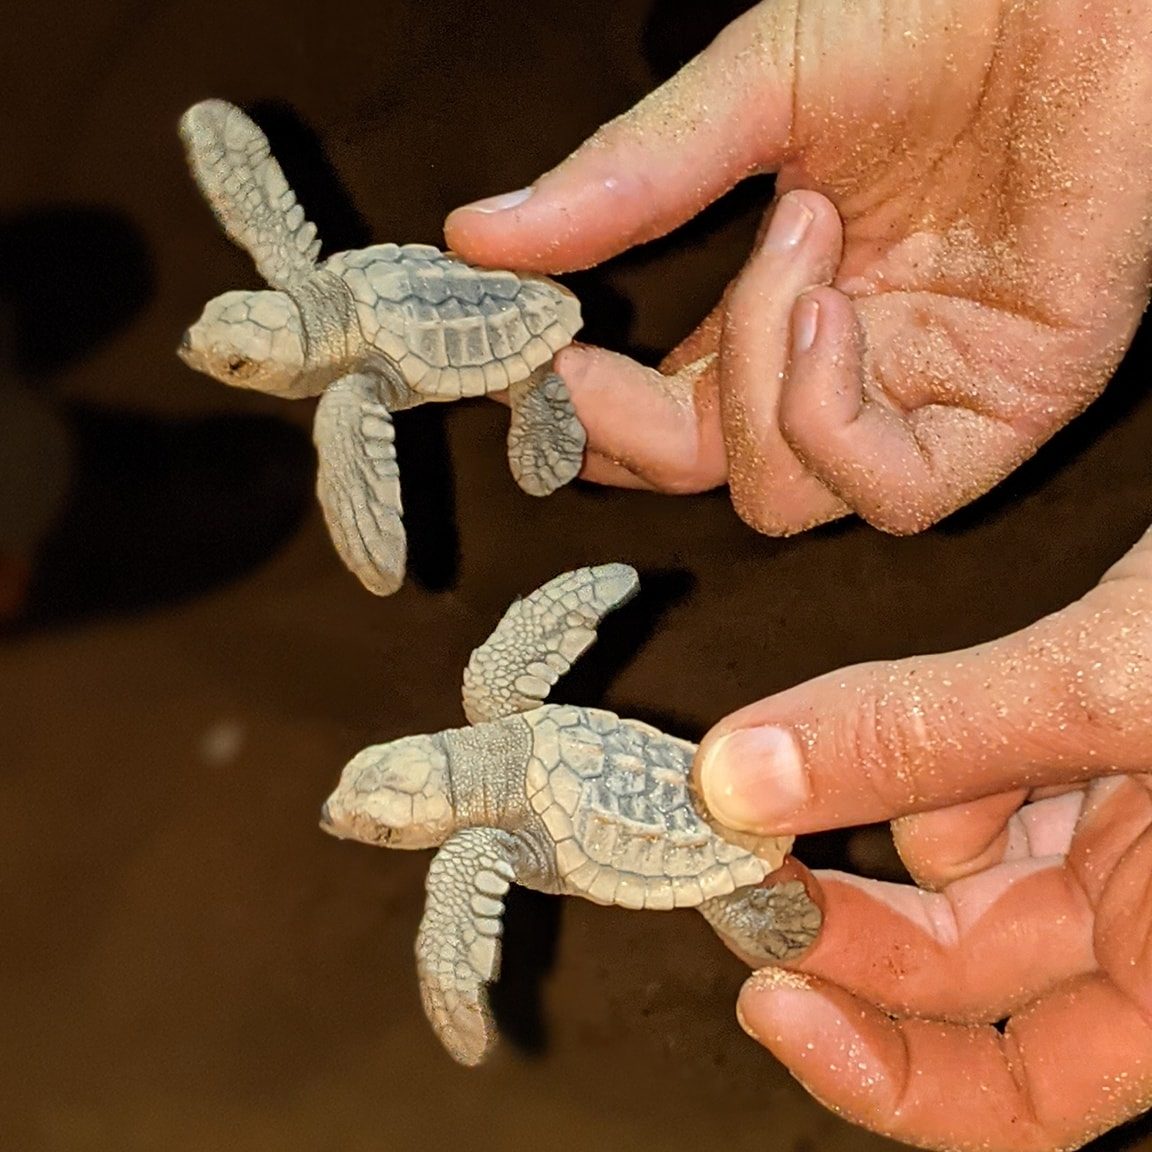 Two hands, each holding a baby loggerhead turtle hatchling covered in sand